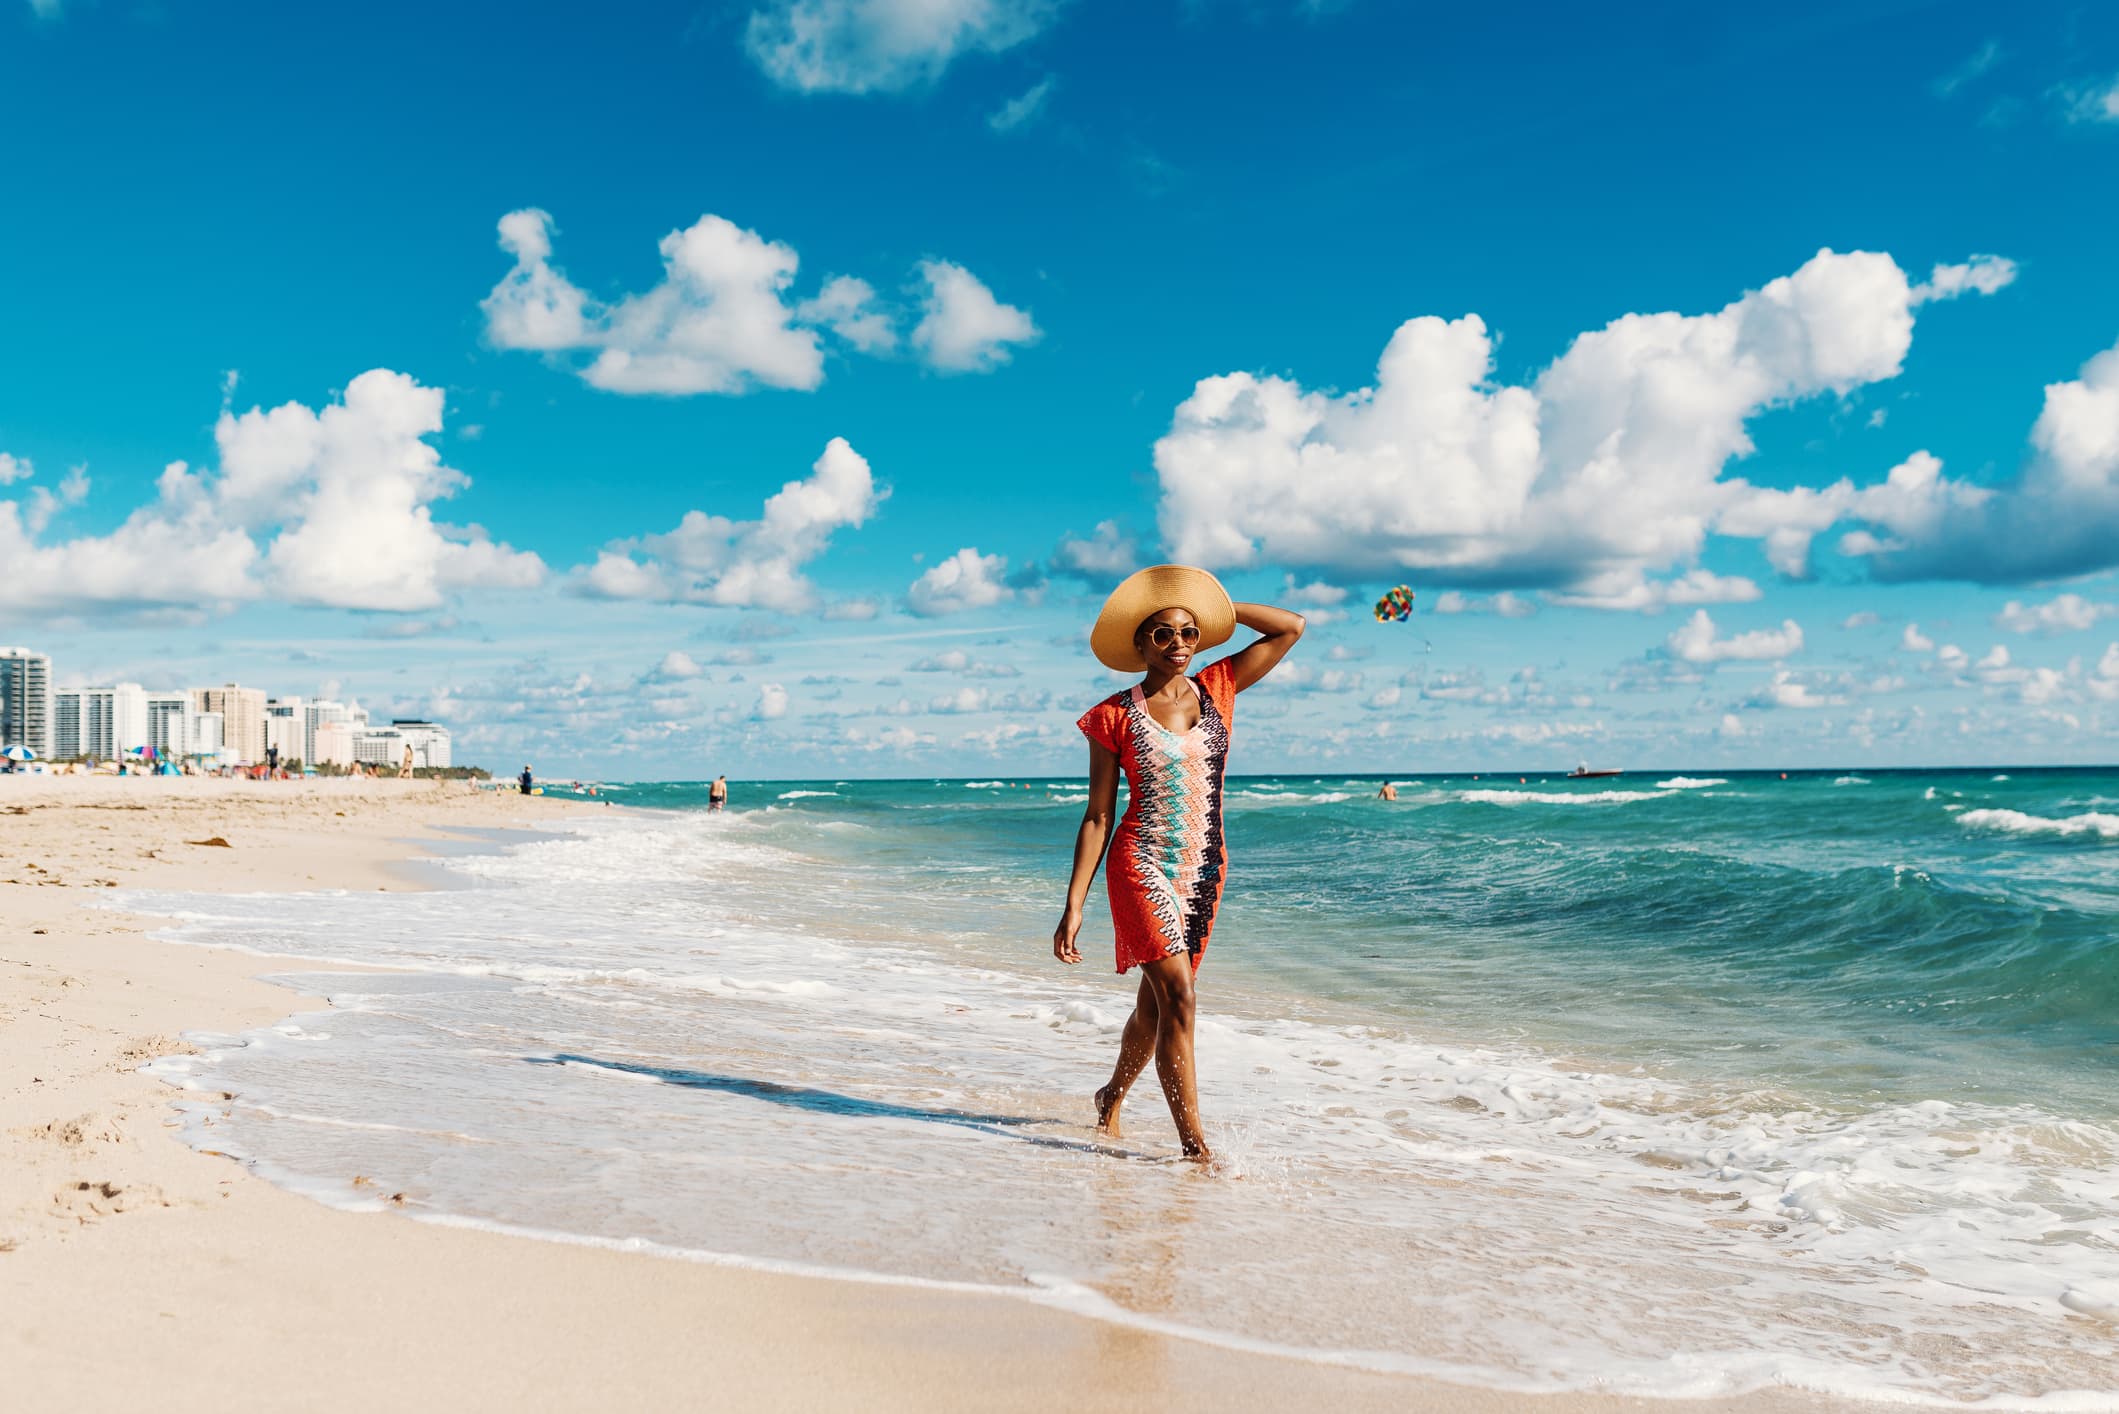 Post-Covid travel: Beaches top vacation wish lists for Americans